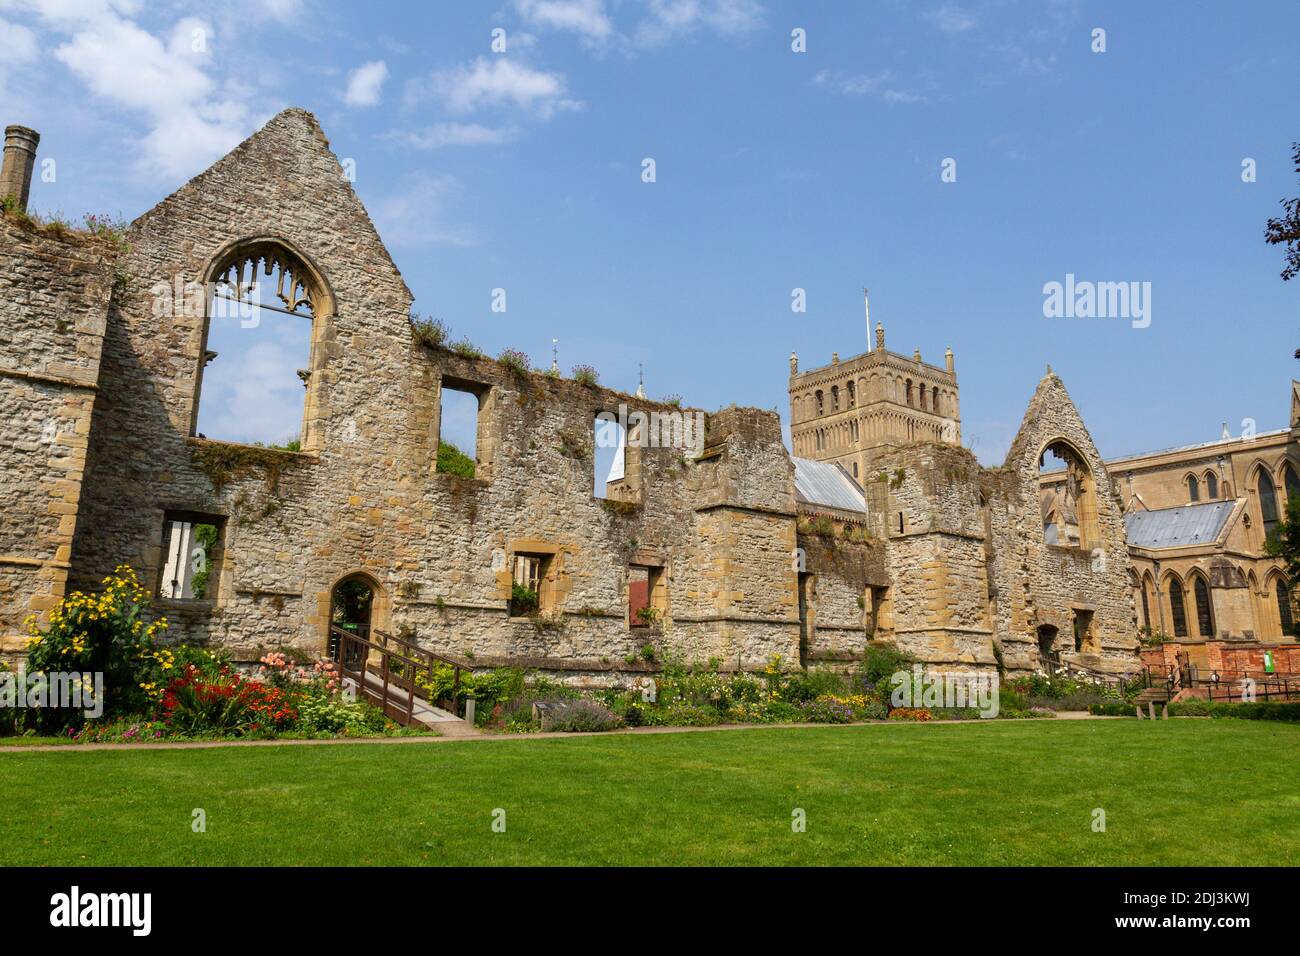 The Palace Ruins in the Education Garden, Southwell Minster, Southwell, Nottinghamshire, UK. Stock Photo